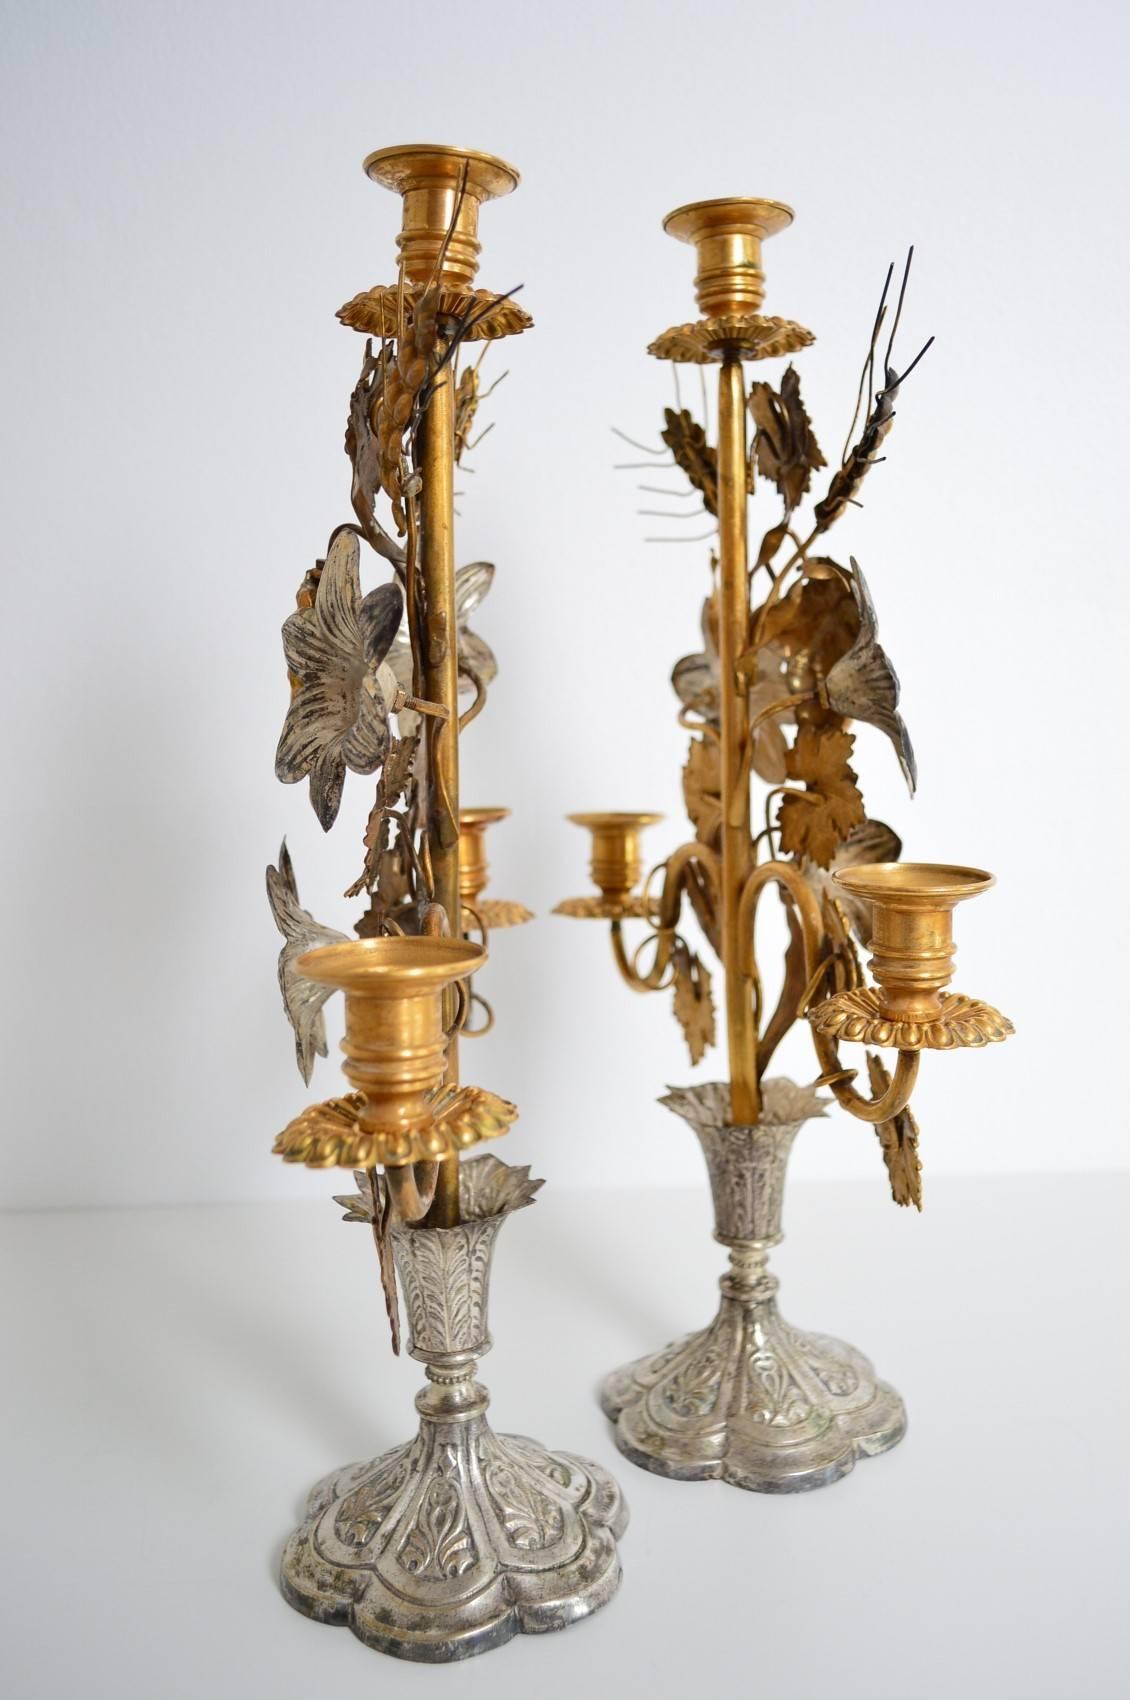 Brass Antique Decorative Candlestick Holders with Flowers, Leafs and Wheat, 1890s